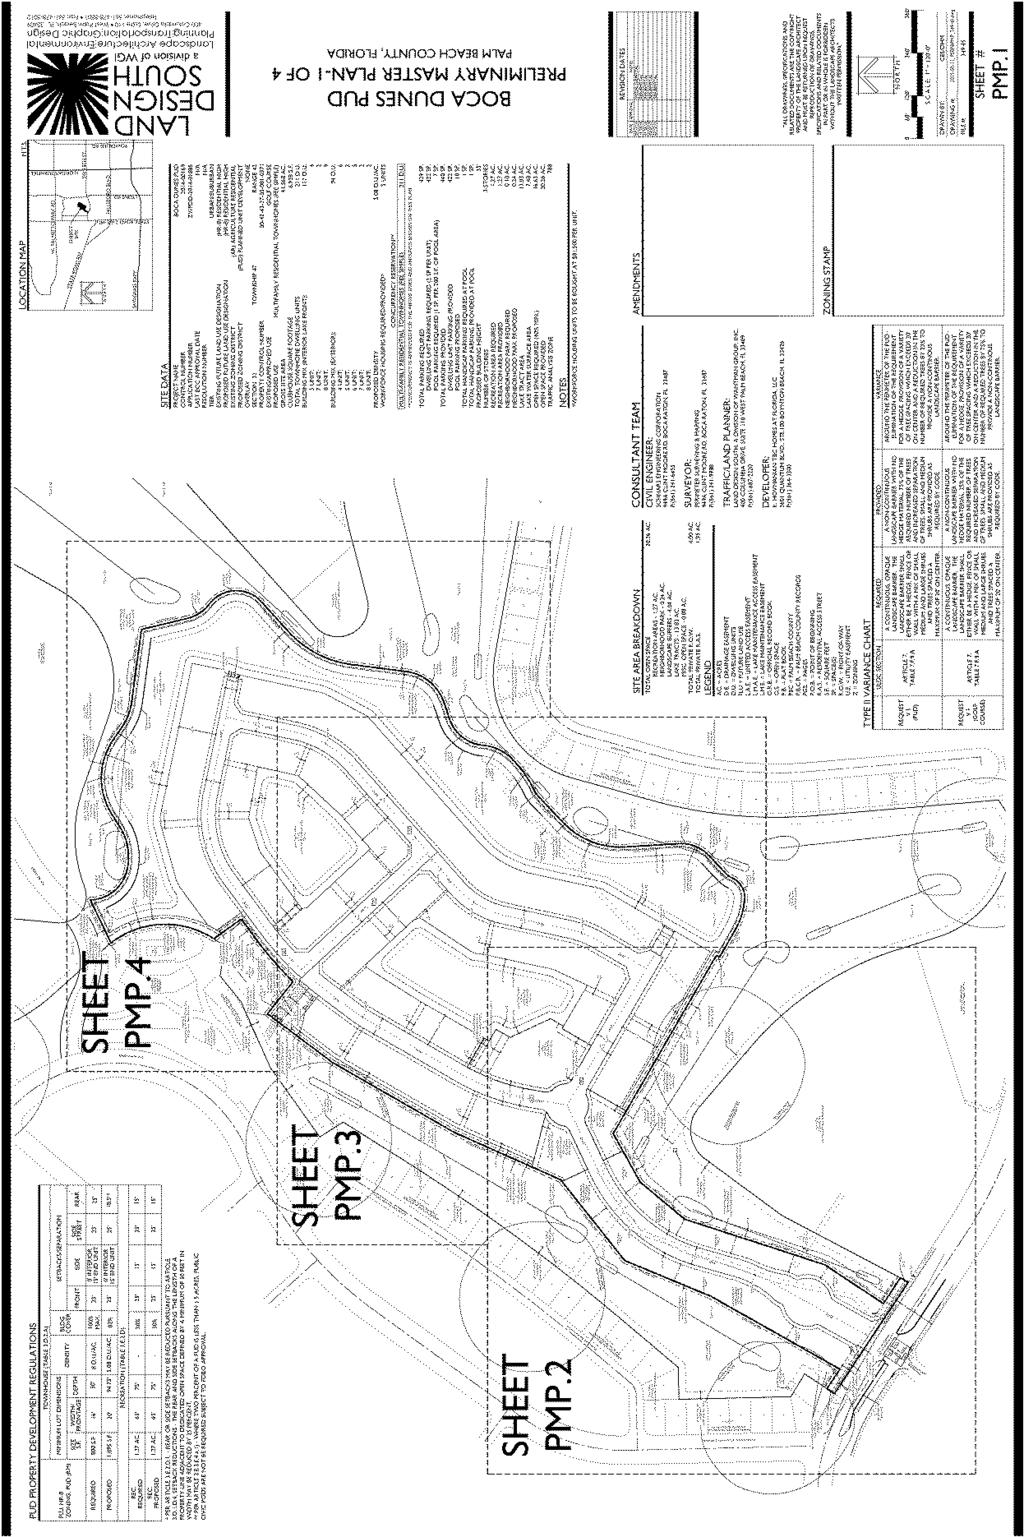 Figure 4 Preliminary Master Plan - dated March